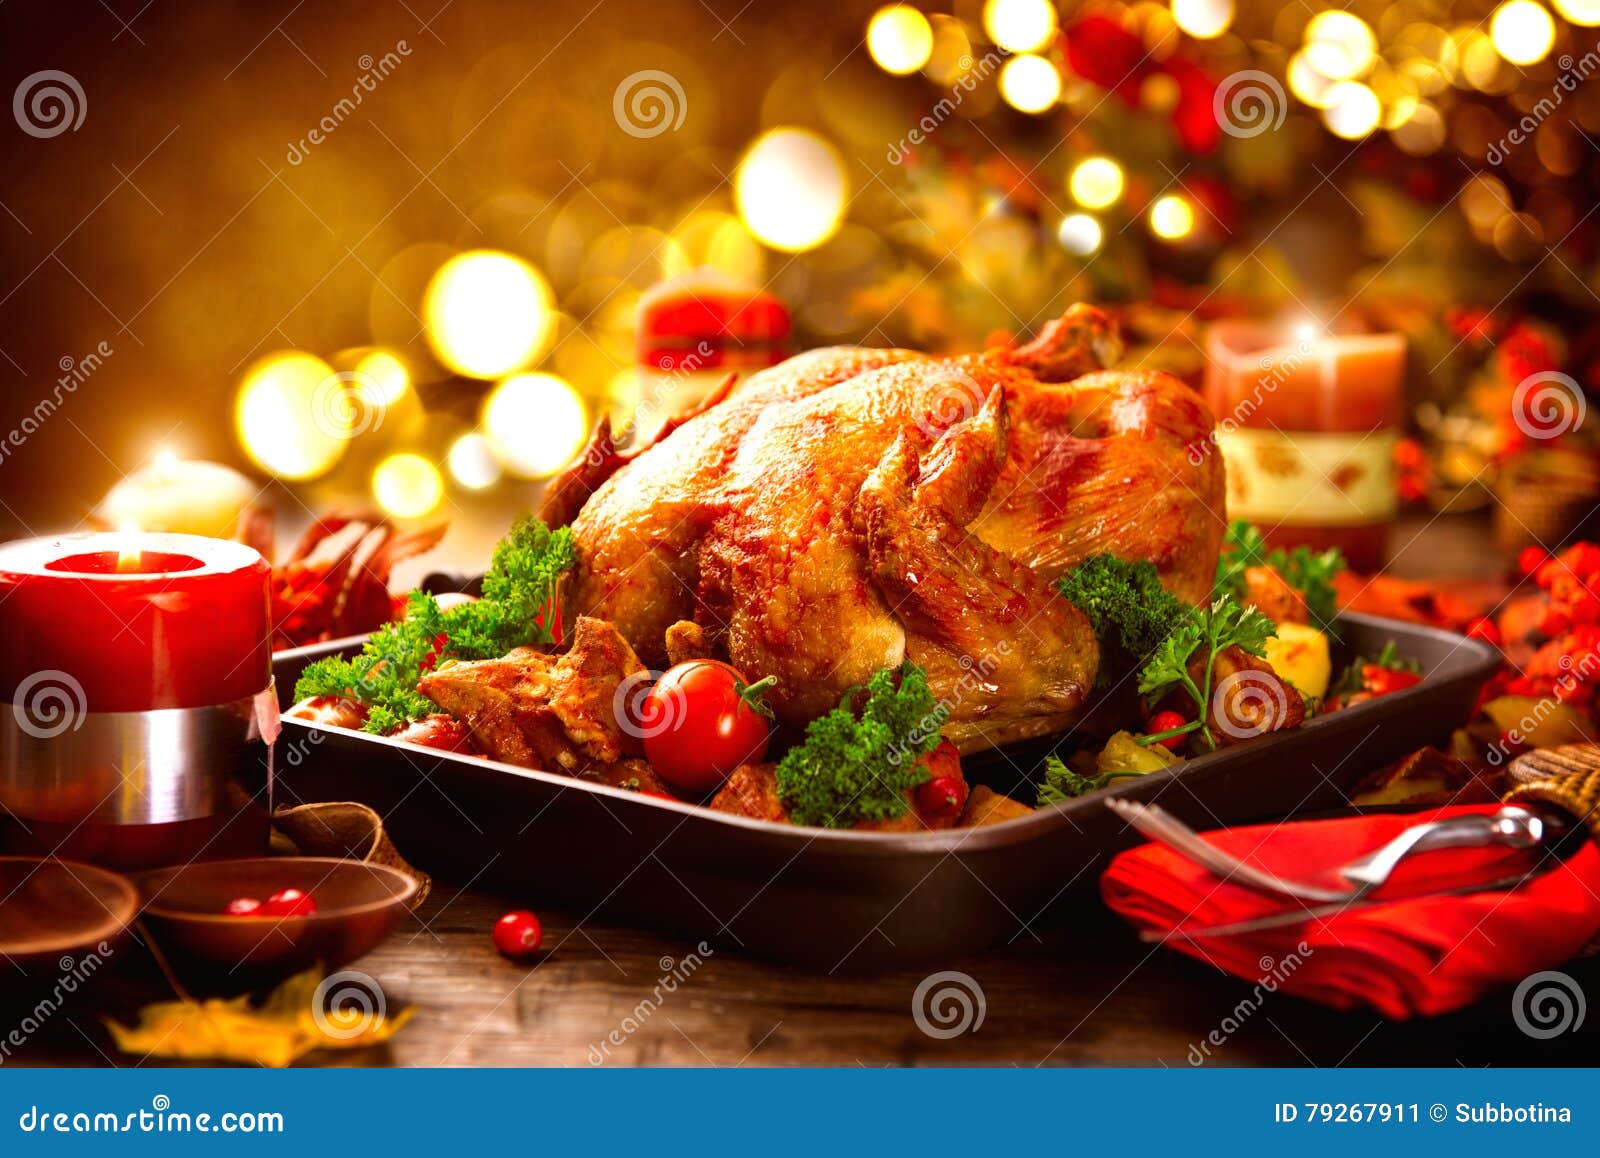 thanksgiving table served with turkey, decorated with autumn leaves